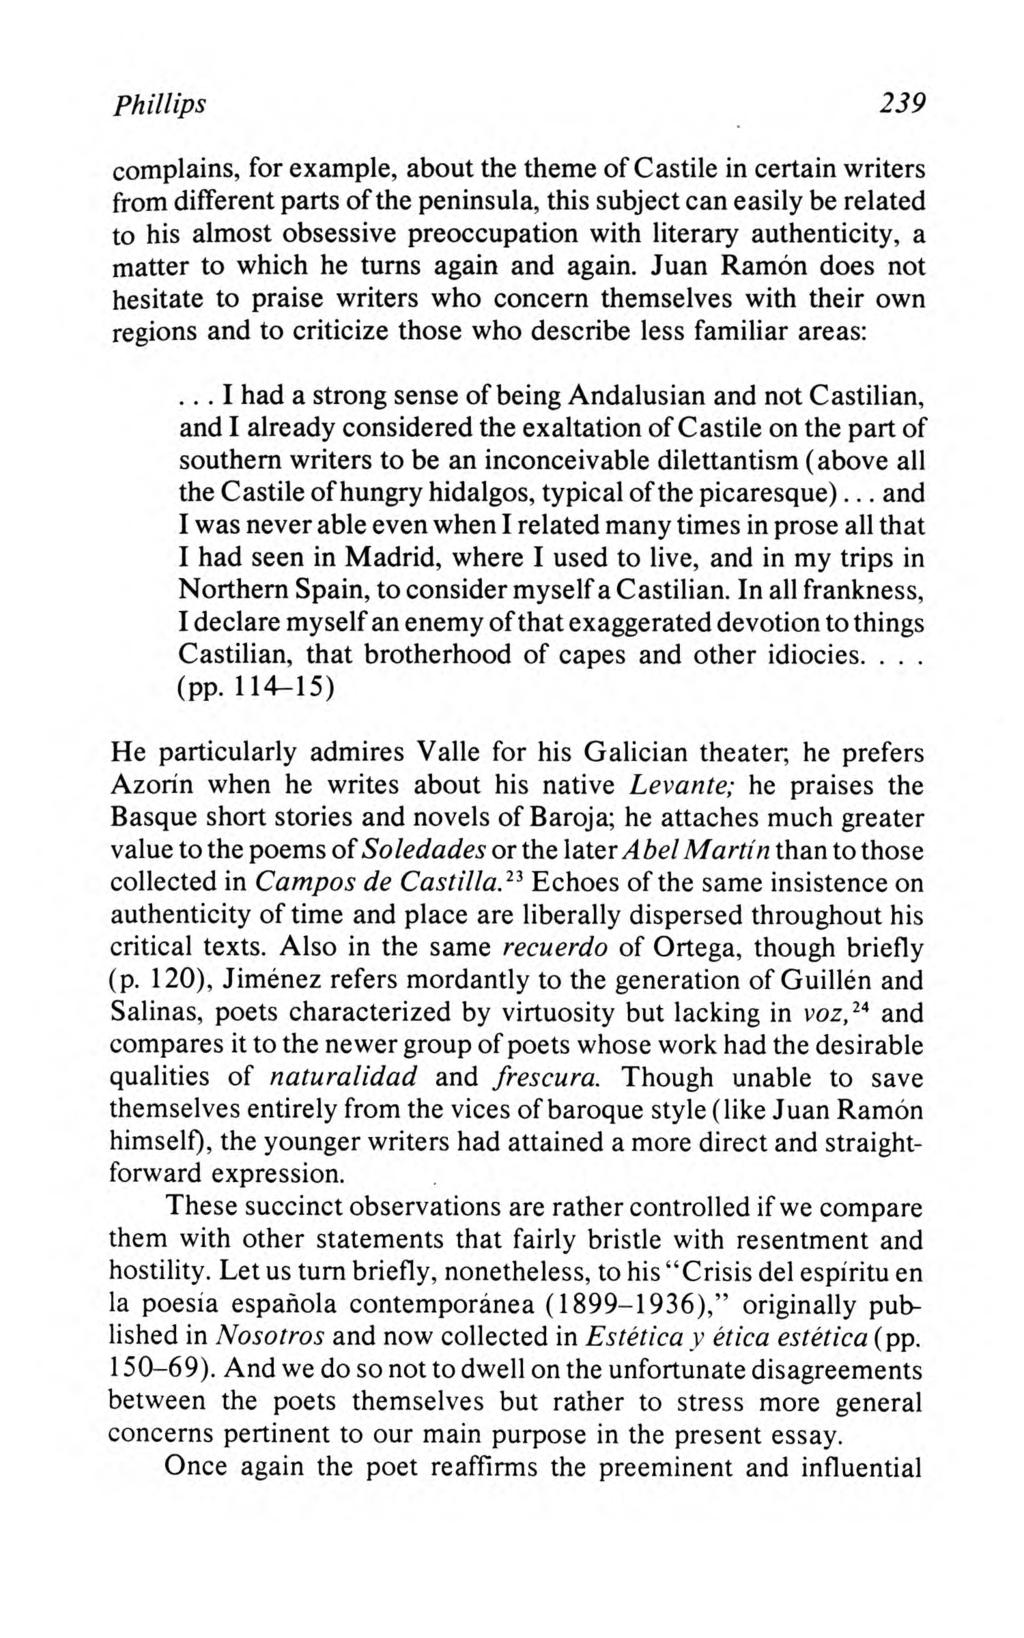 Phillips: The Literary Criticism and Memoirs of Juan Ramón Jiménez Phillips 239 complains, for example, about the theme of Castile in certain writers from different parts of the peninsula, this